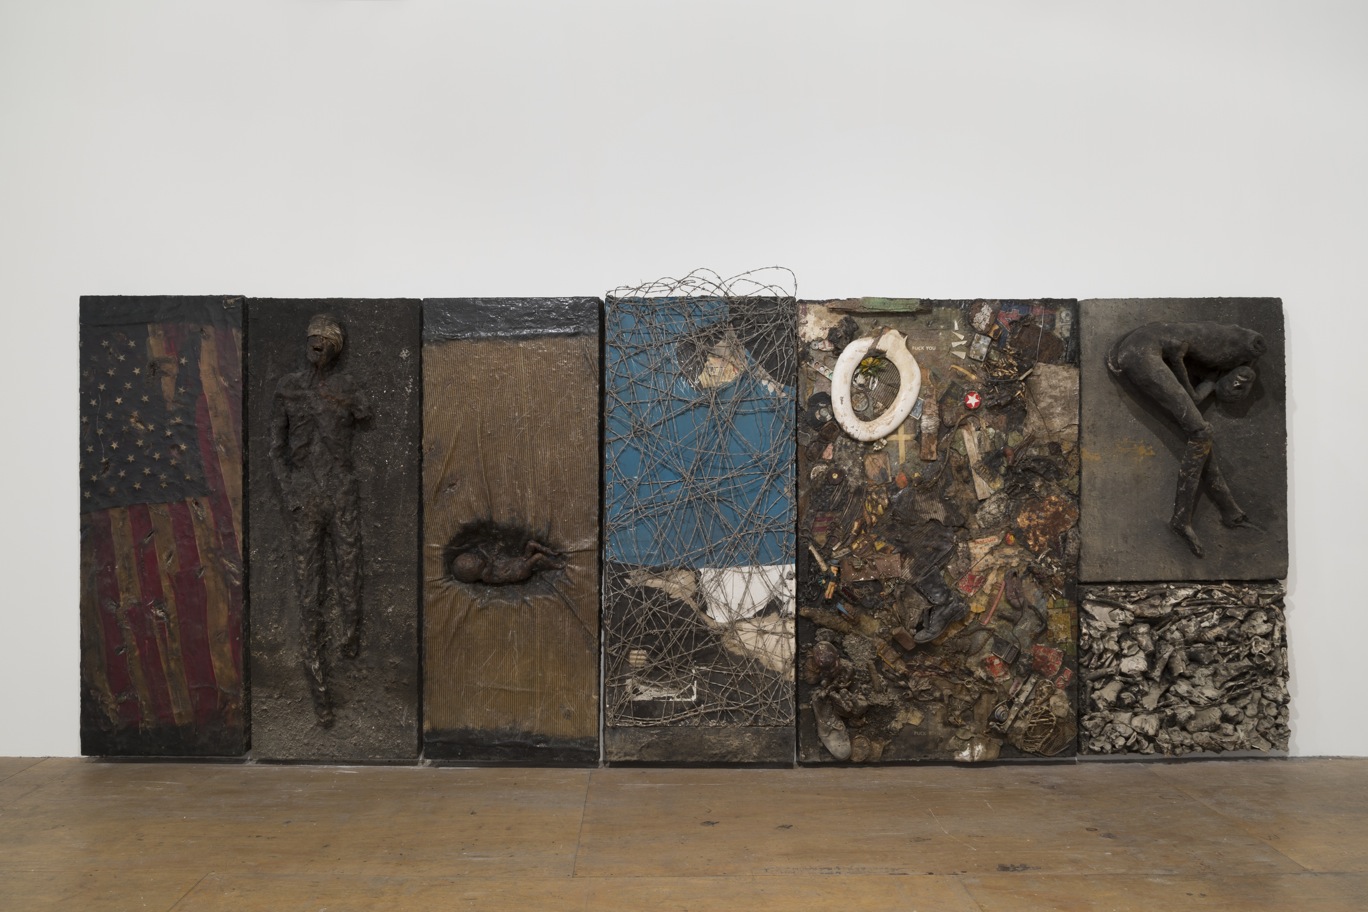 Luther Price, *Panel Piece One, (Six Panels*), 1984. Mixed media, plastic